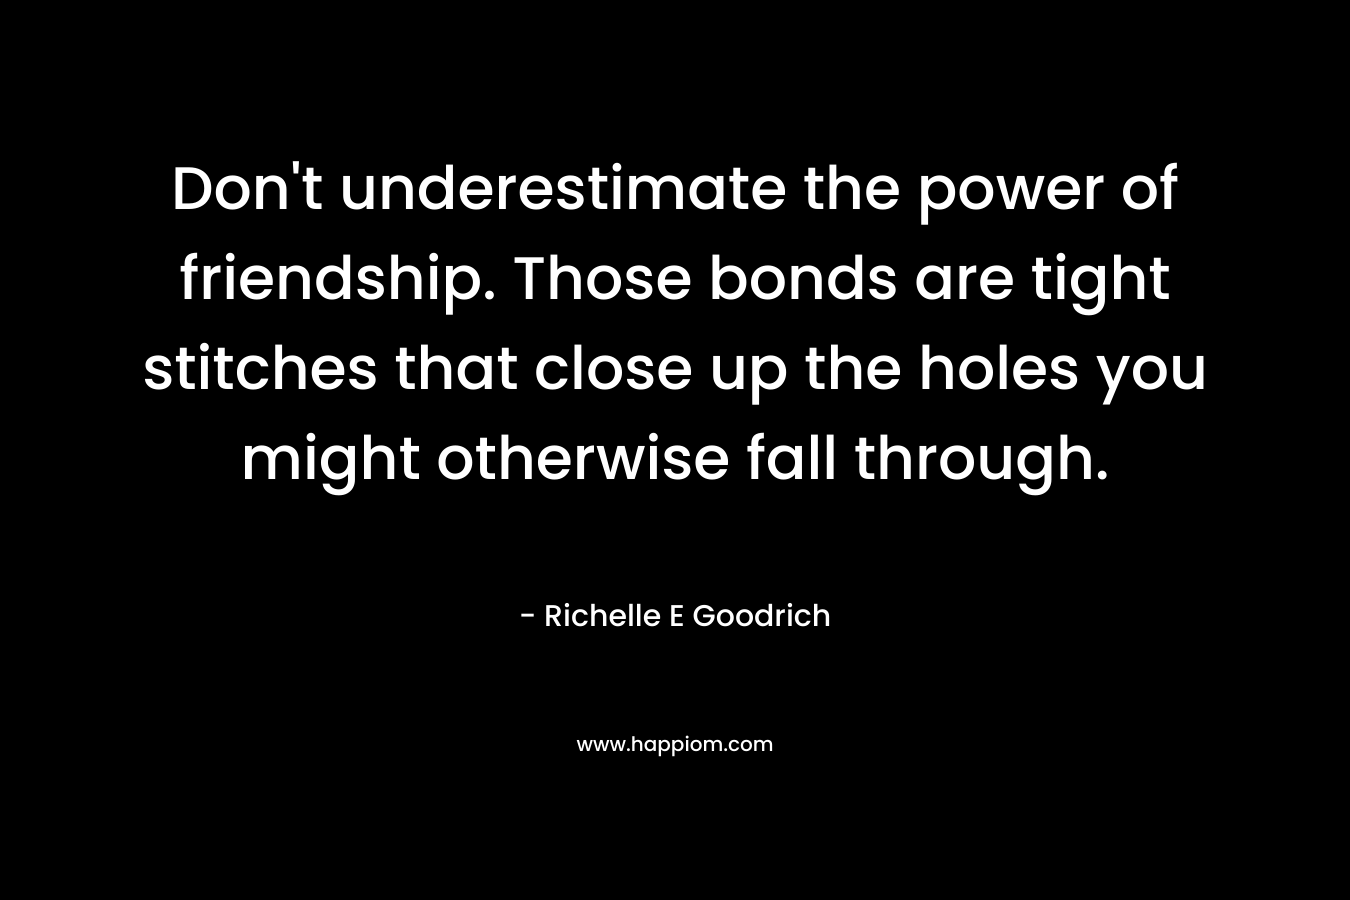 Don’t underestimate the power of friendship. Those bonds are tight stitches that close up the holes you might otherwise fall through. – Richelle E Goodrich